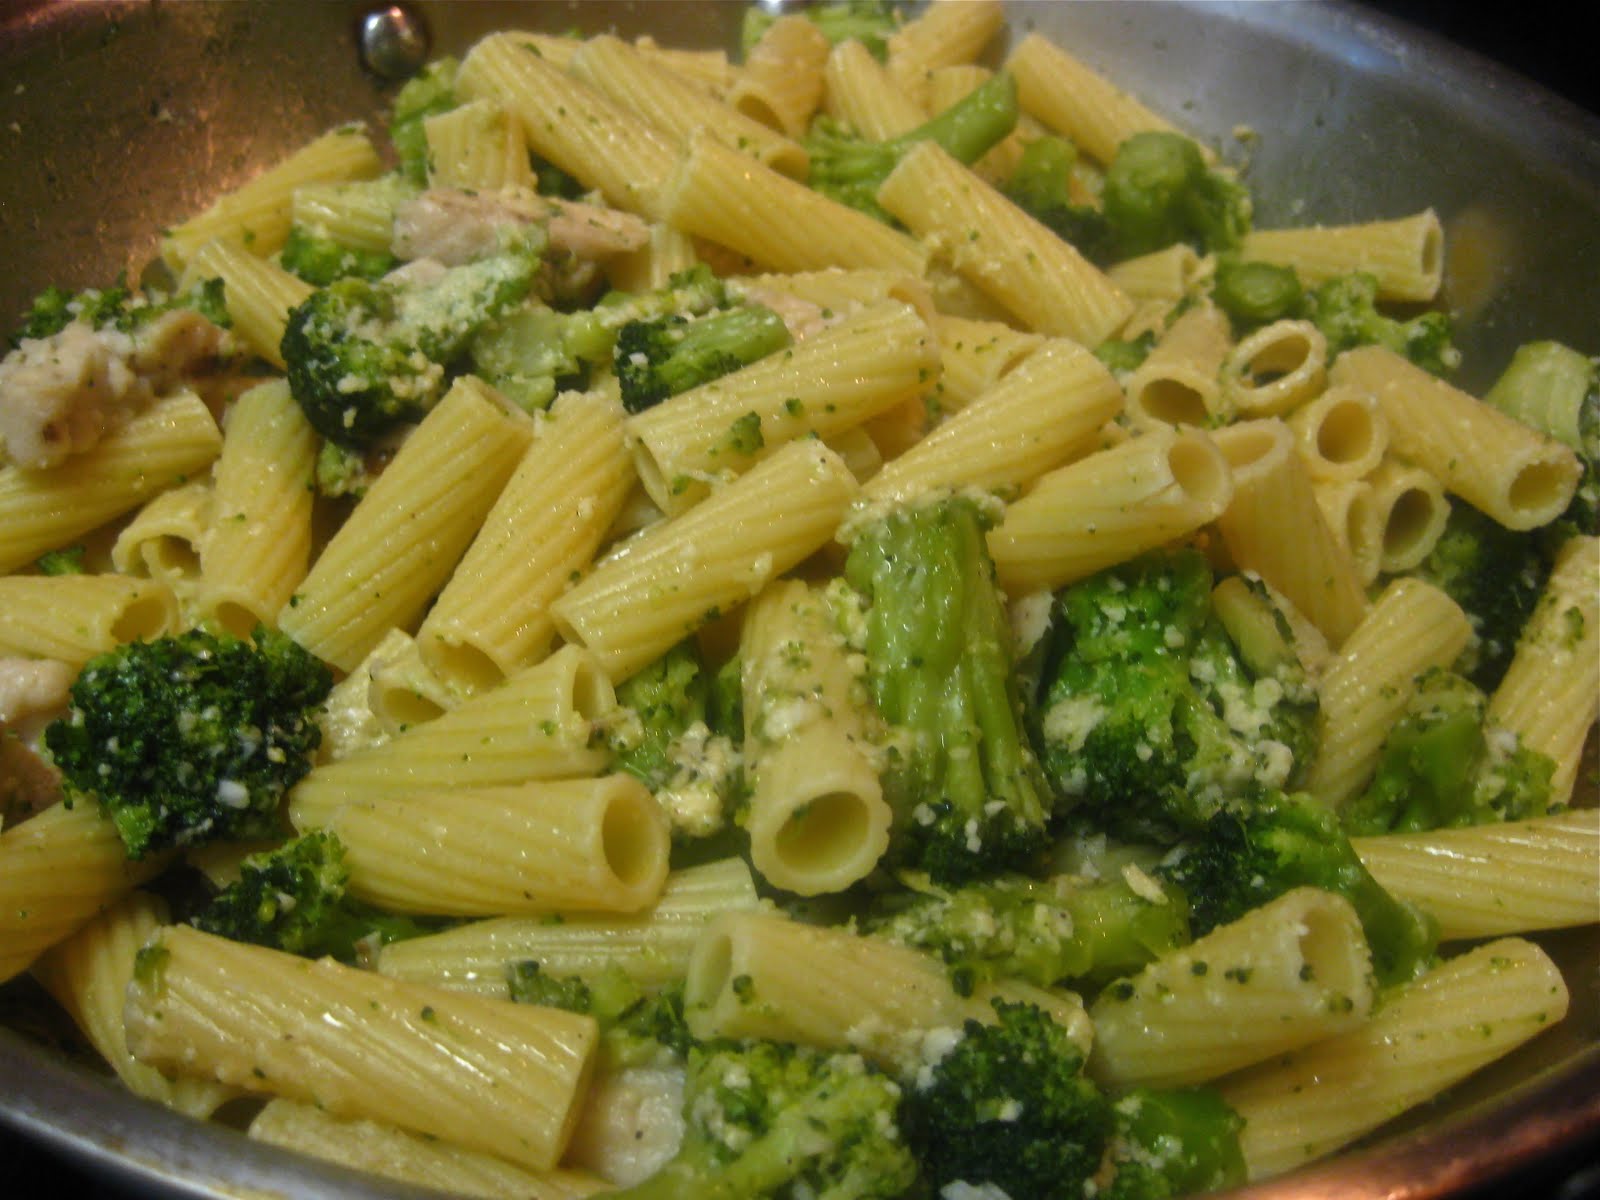 Meghalicious: Quick &amp; Tasty: Penne with Broccoli